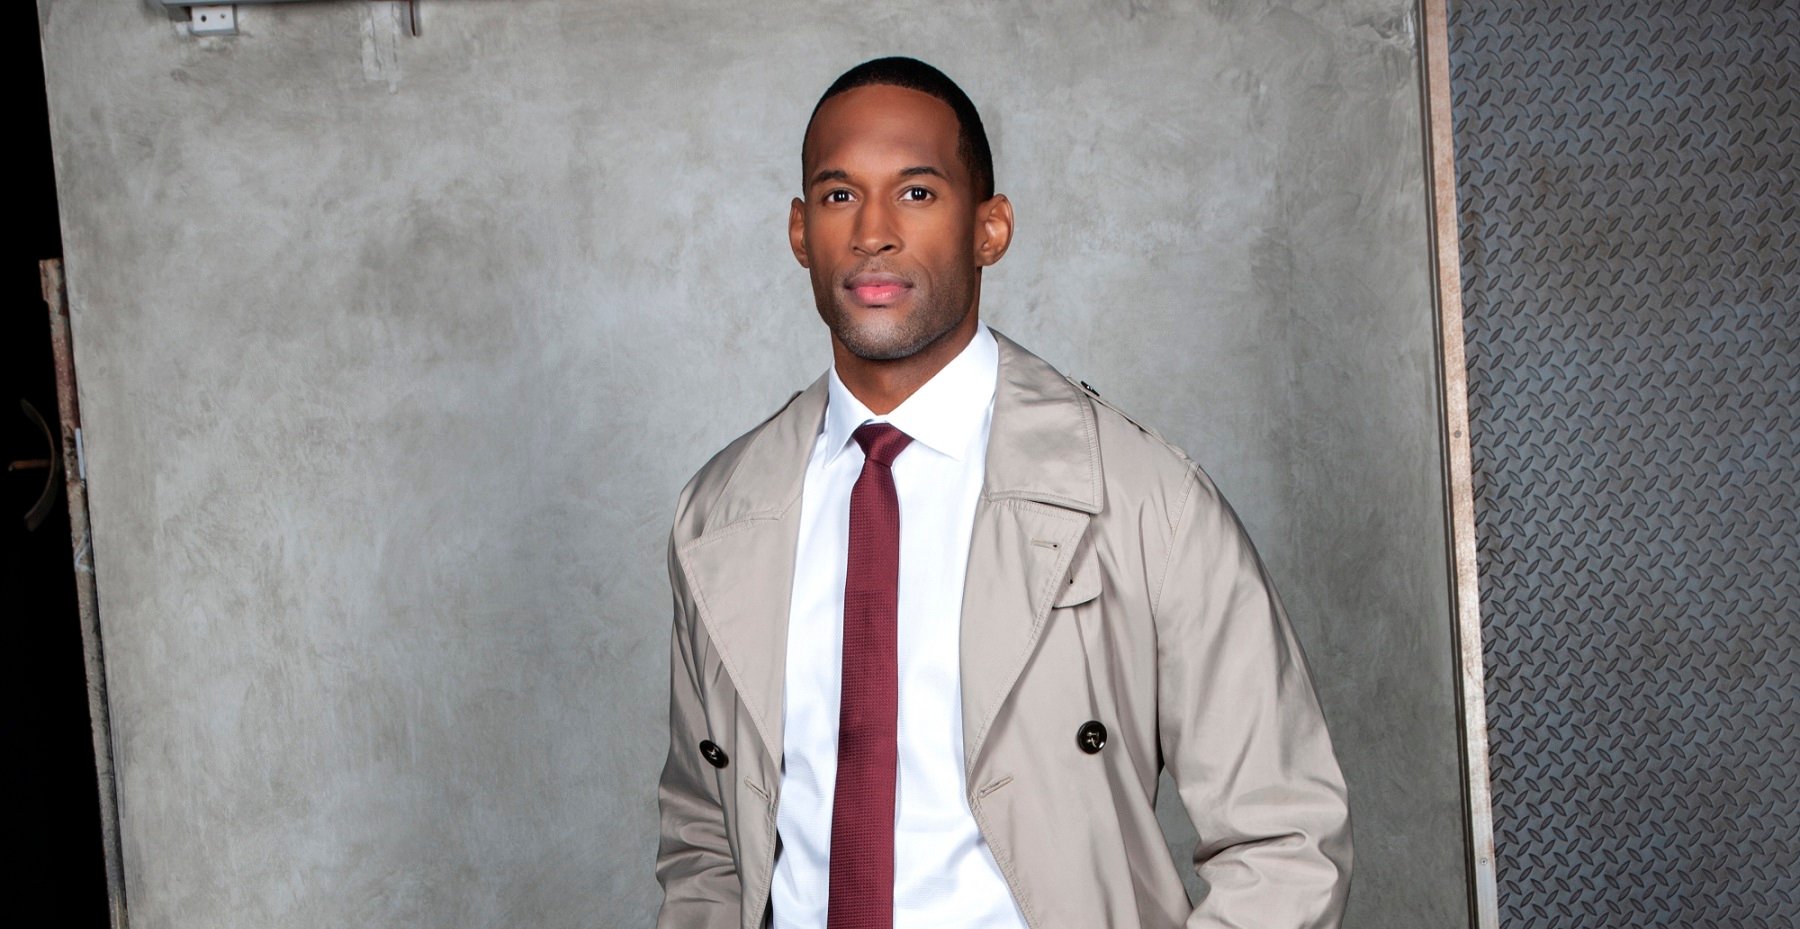 The Bold and the Beautiful speculation focuses on Carter, pictured here in a white shirt with a red tie